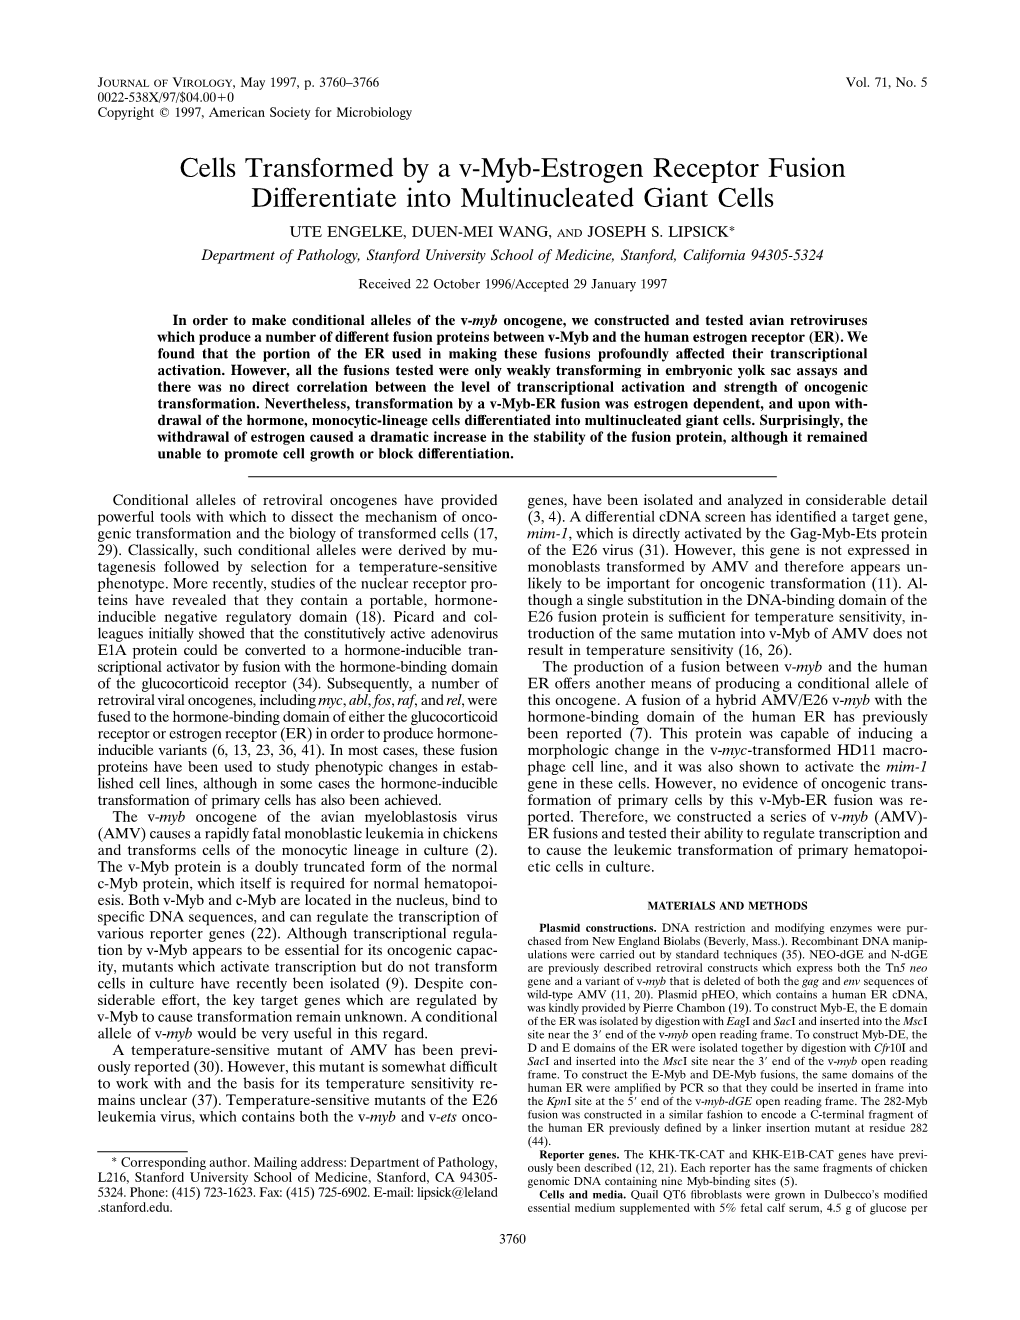 Cells Transformed by a V-Myb-Estrogen Receptor Fusion Differentiate Into Multinucleated Giant Cells